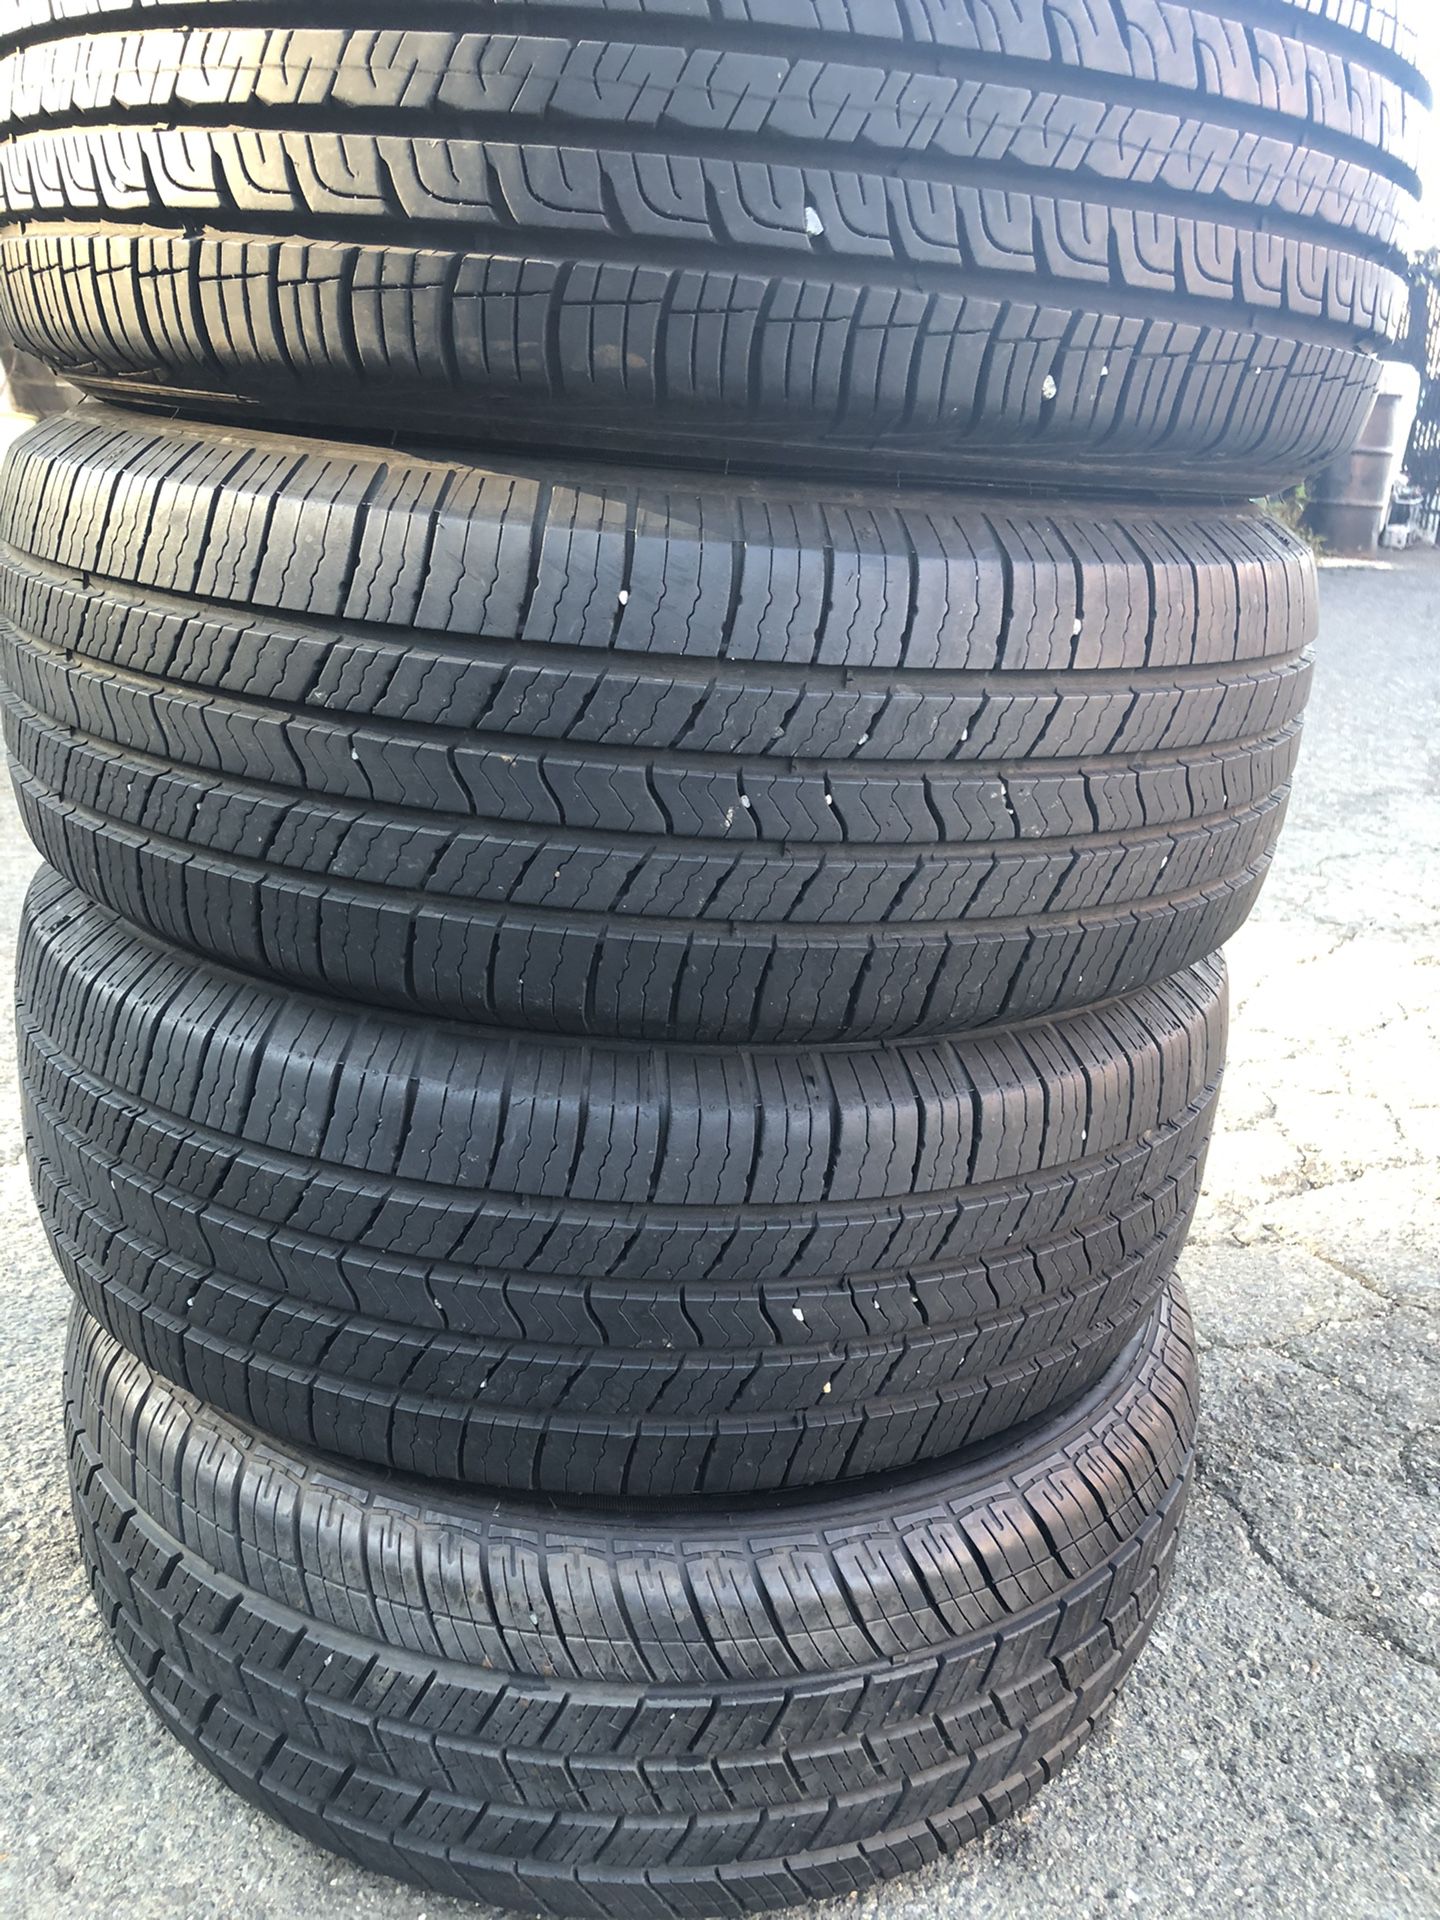 Set 4 usted tire 215/60R16 two MICHELIN and one Goodyear and one DEFINITY one used tire have patch set 4 used tire $140 4 llantas usadas 215/60R16 2